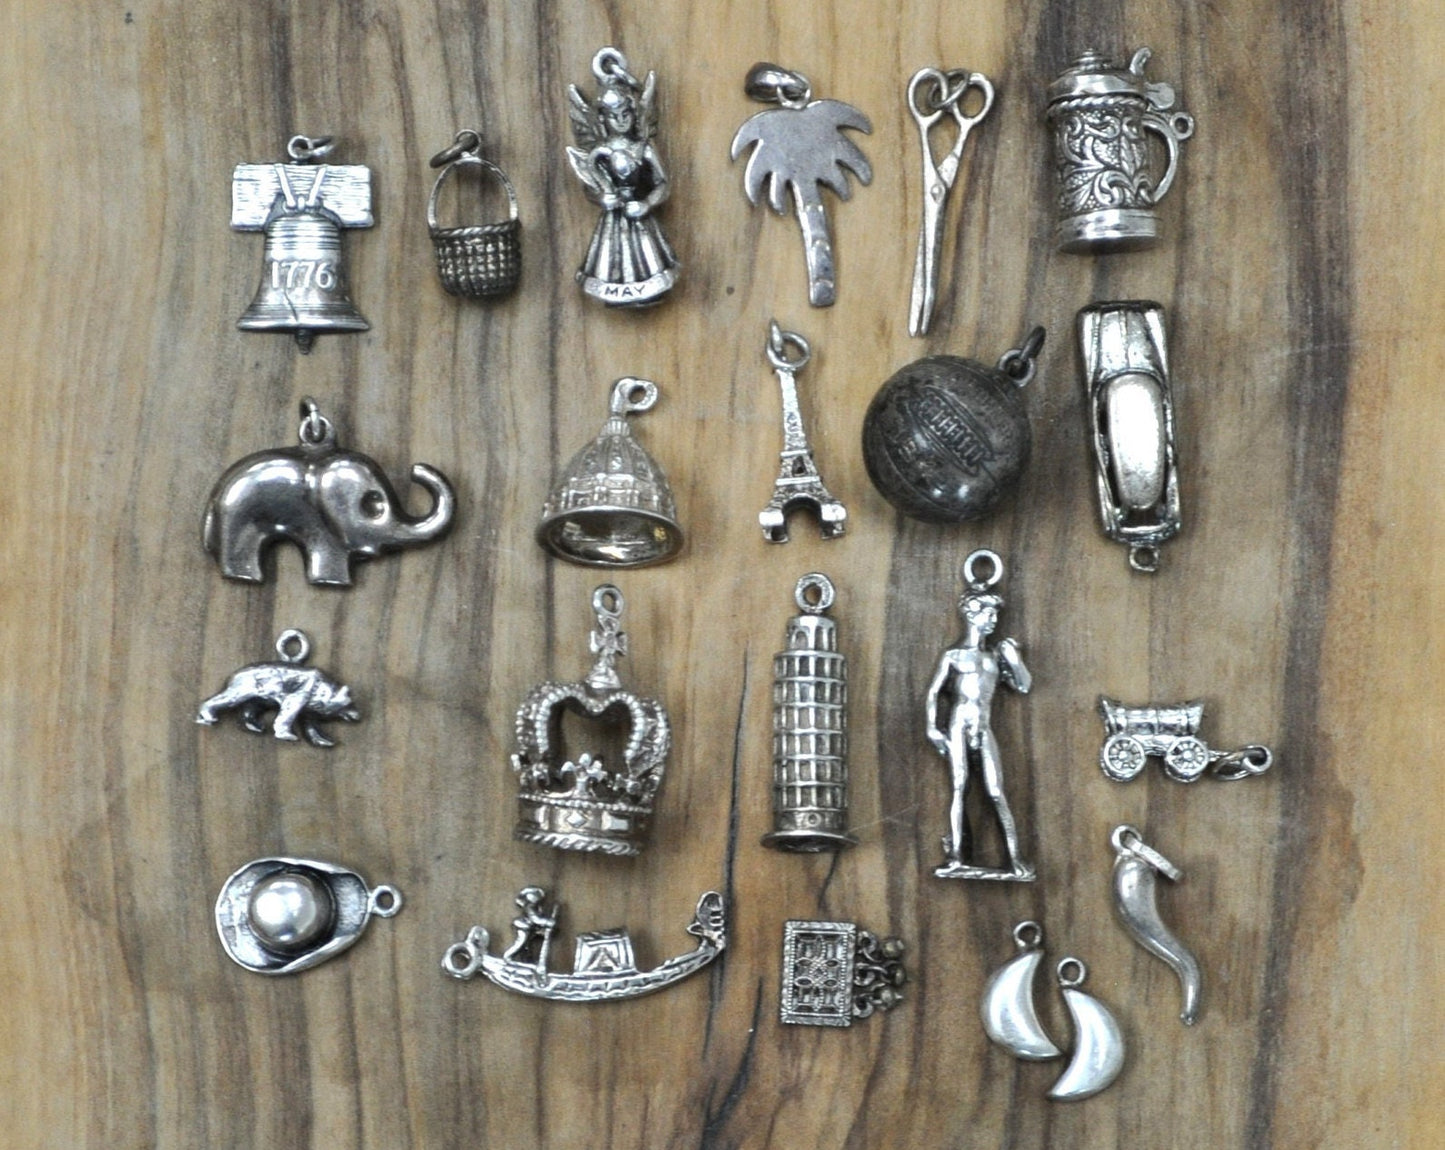 Vintage Sterling Silver Charms! Choice of Charm! Bracelet Charms, Travel Charms, Working Charms, Baseball, Stein, Eifel Tower, + many more!